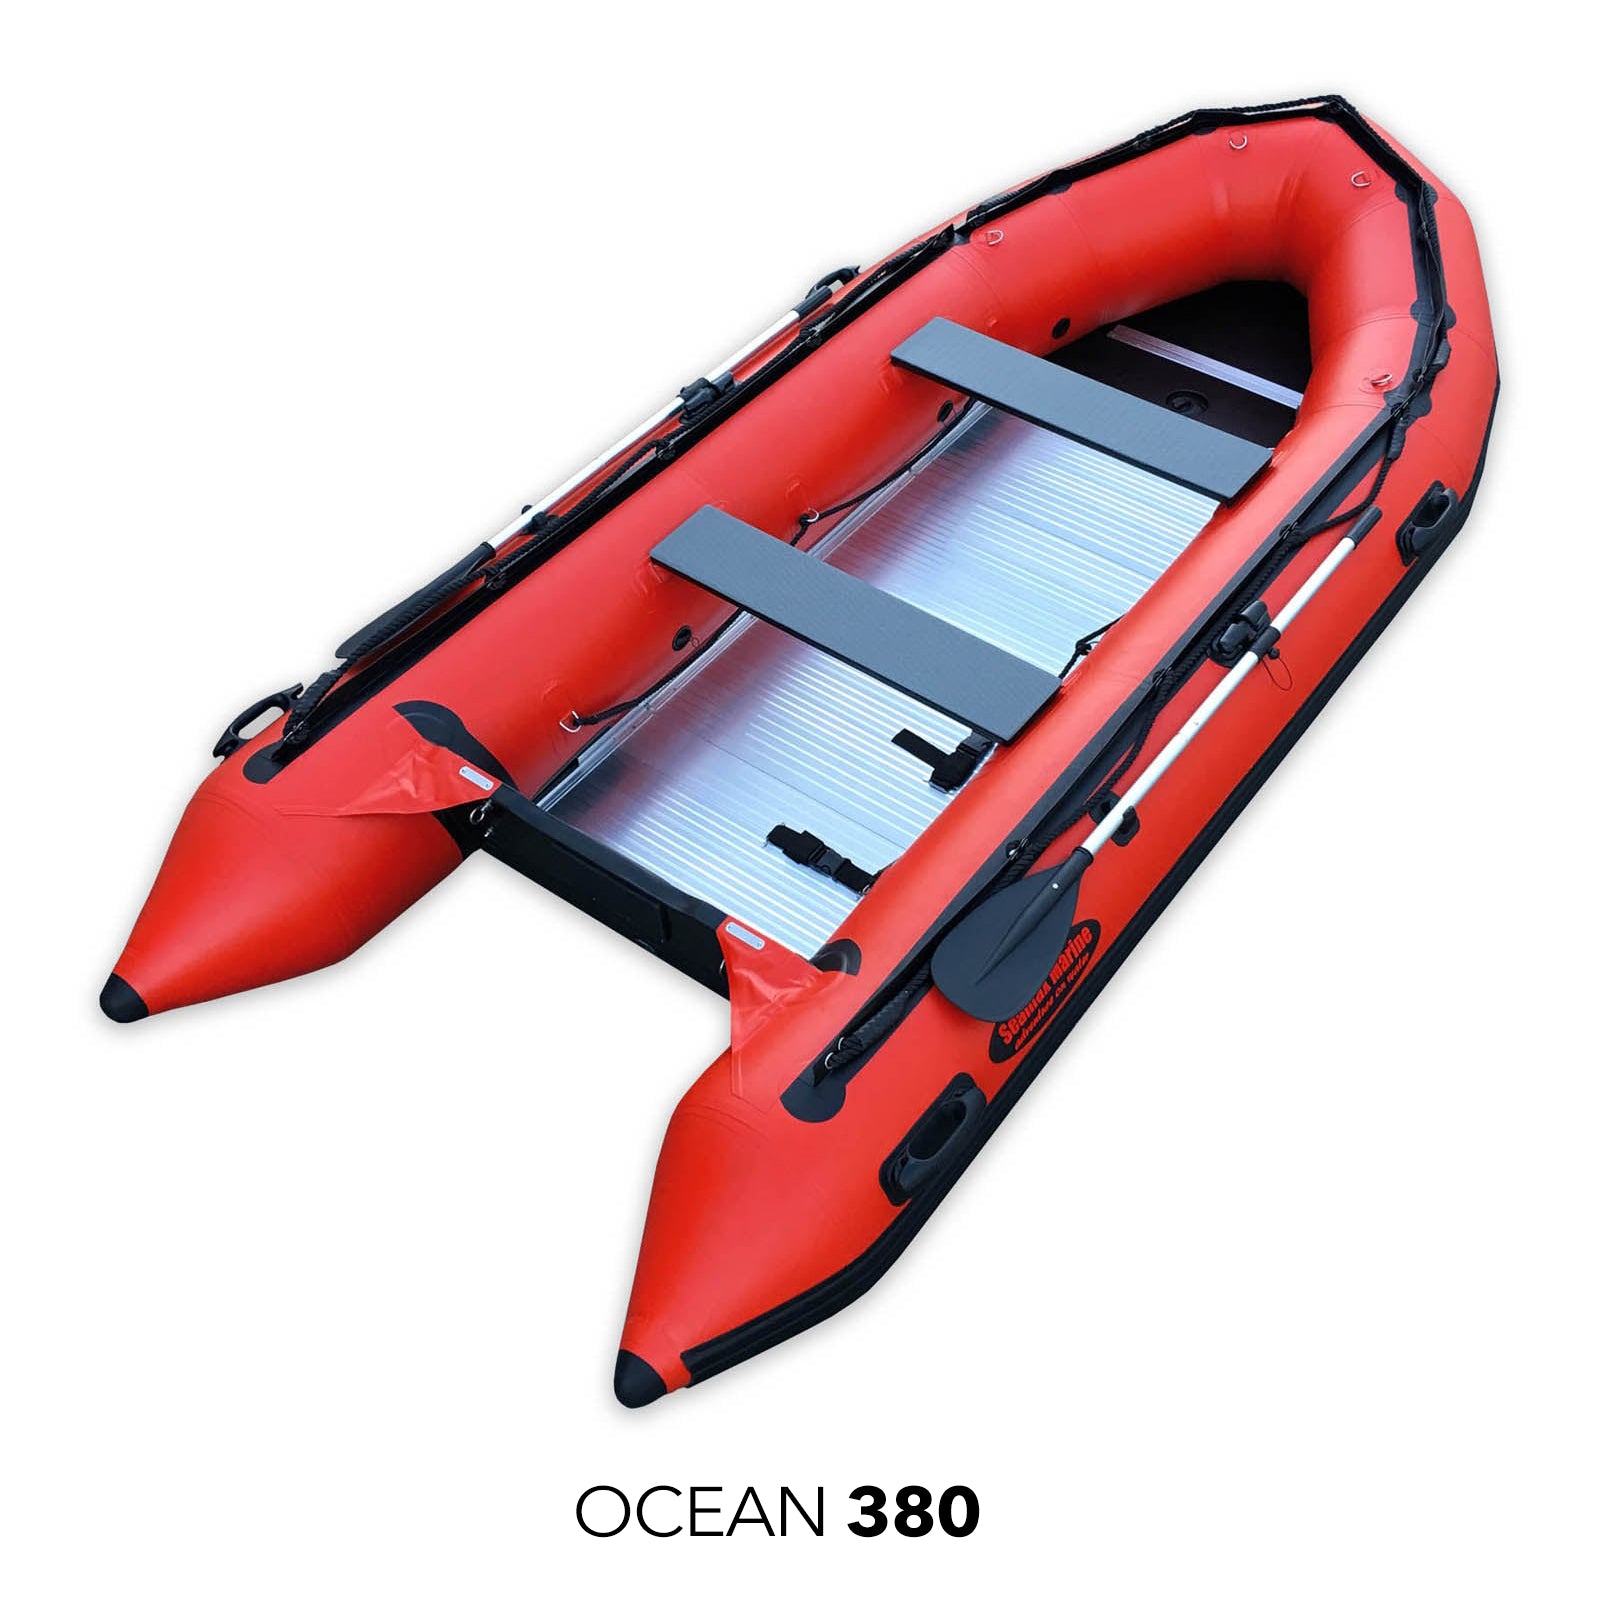 Seamax Ocean380 12.5 Feet Heavy Duty PVC Inflatable Boat, Max 5 Passengers & Rated 25HP